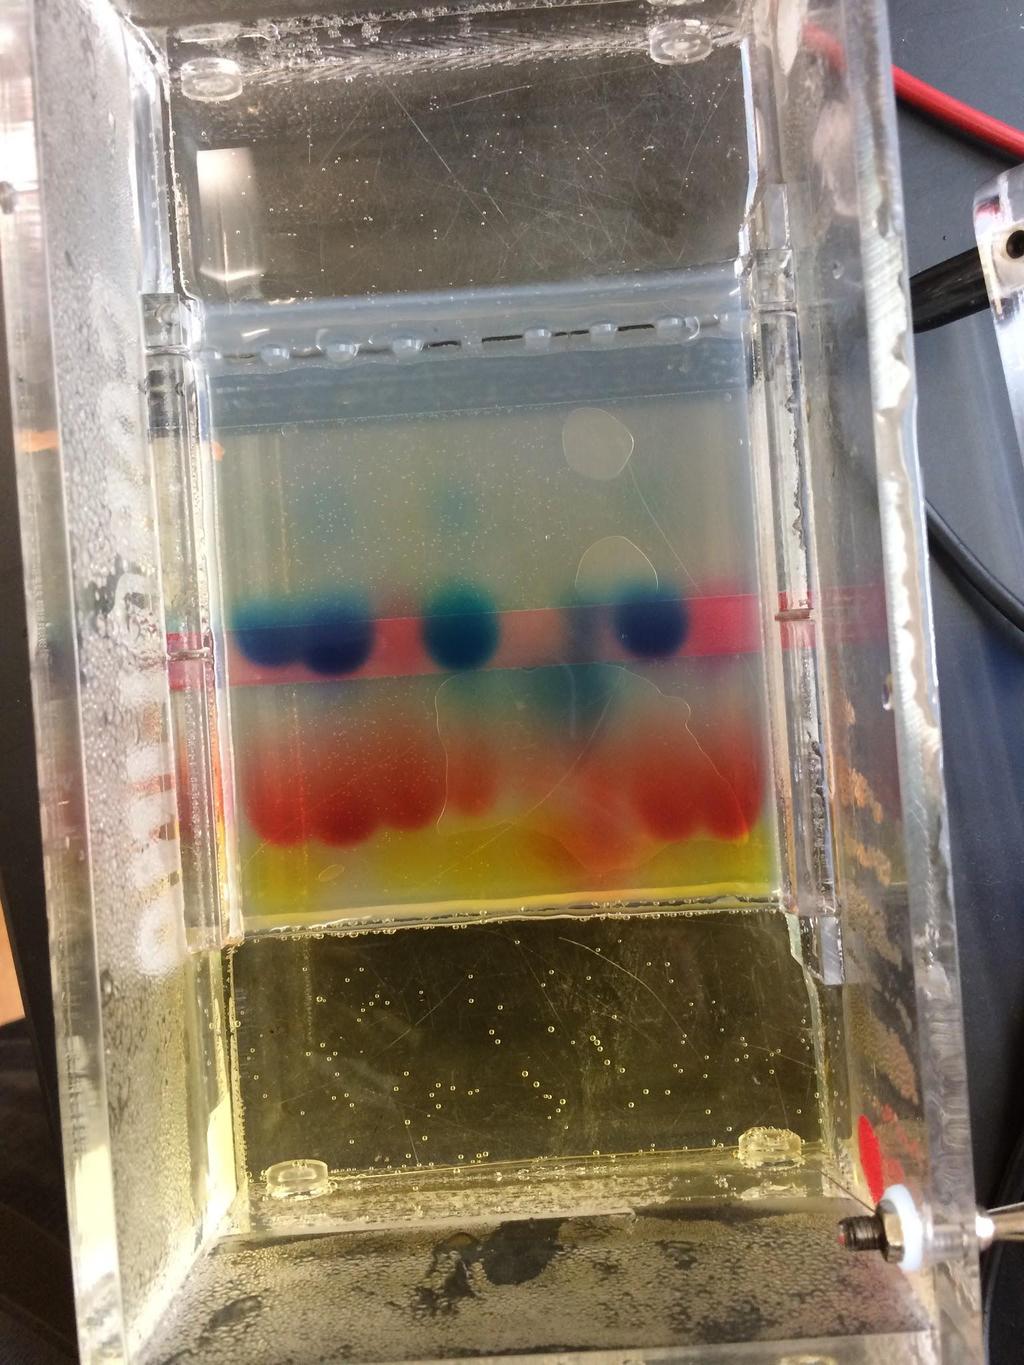 DNA Fingerprinting Sam Sophomore and Carleton Comet both match CS1 Nancy Normal matches CS2 (To get this we made an agarose gel, extracted DNA for each suspect and the